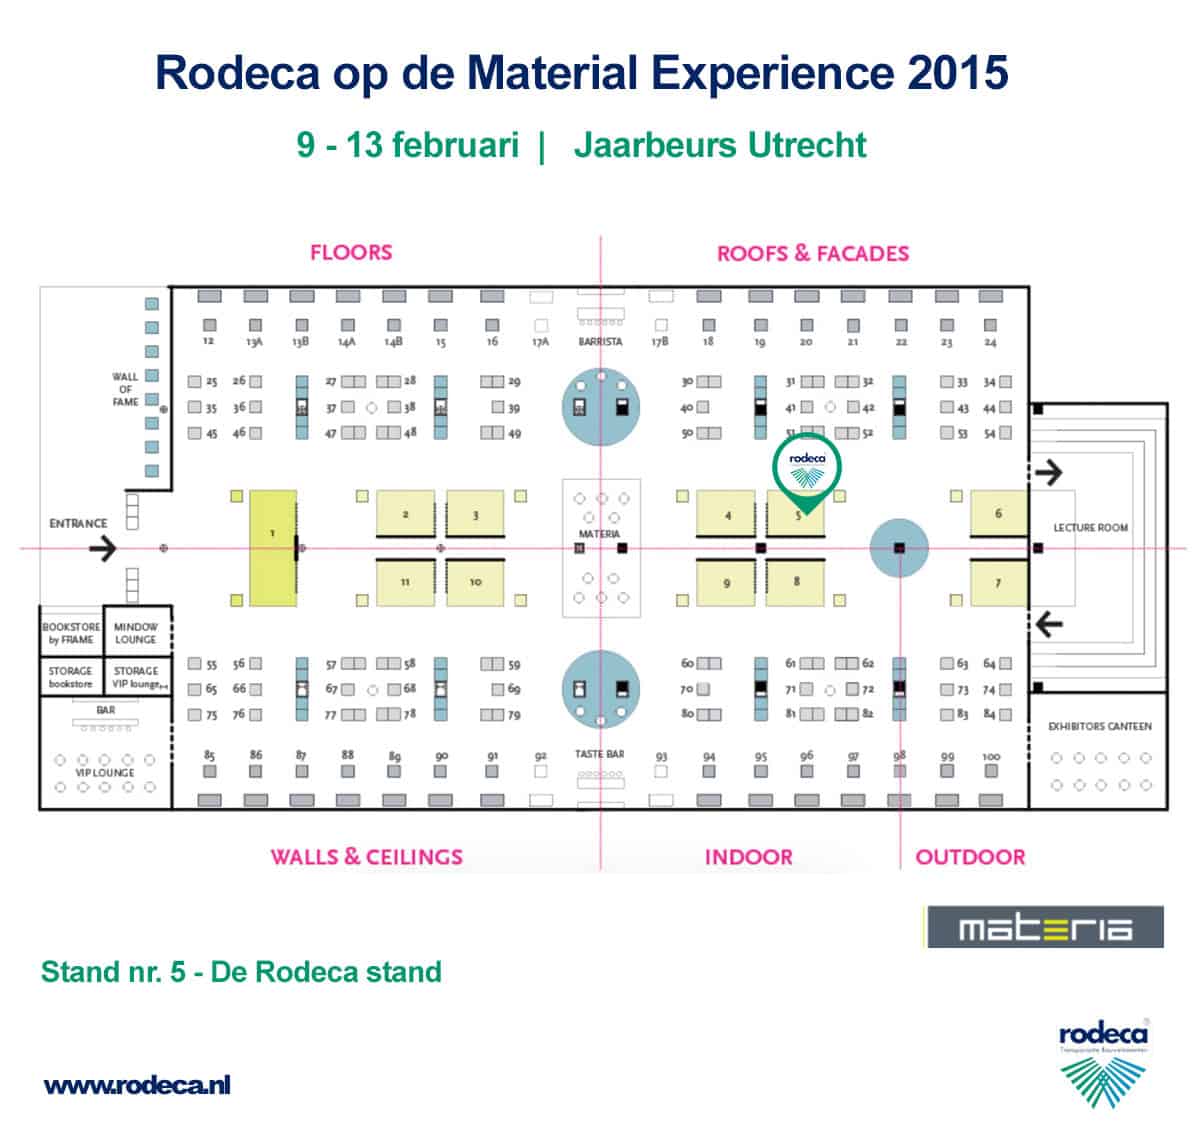 Rodeca-op-Material-Xperience